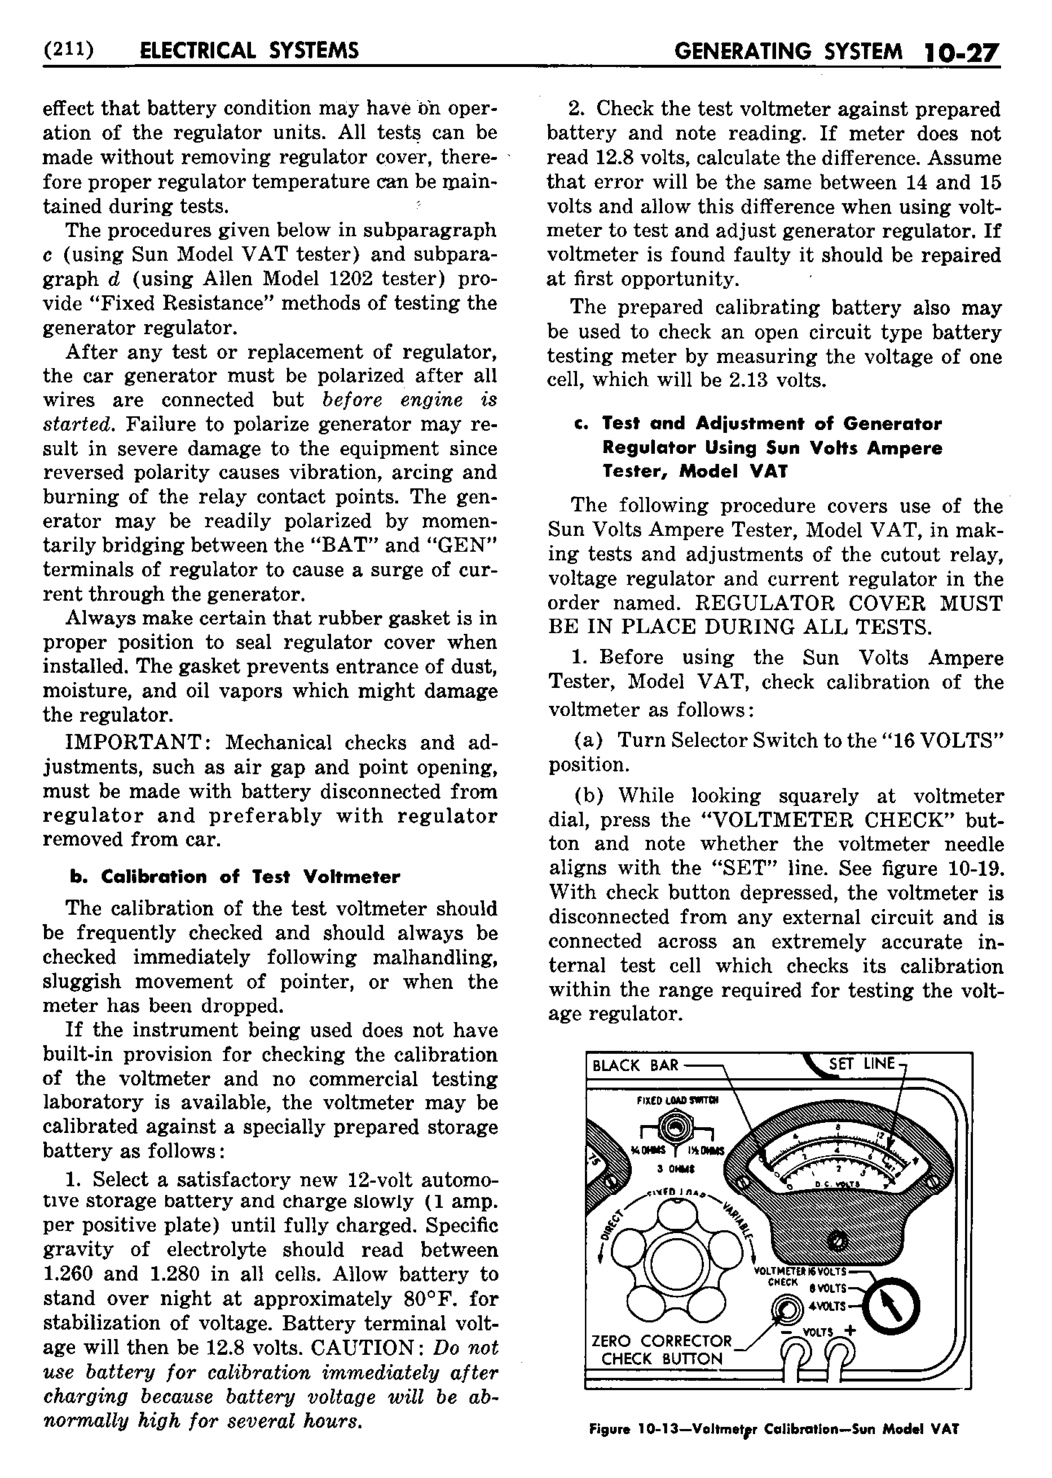 n_11 1953 Buick Shop Manual - Electrical Systems-027-027.jpg